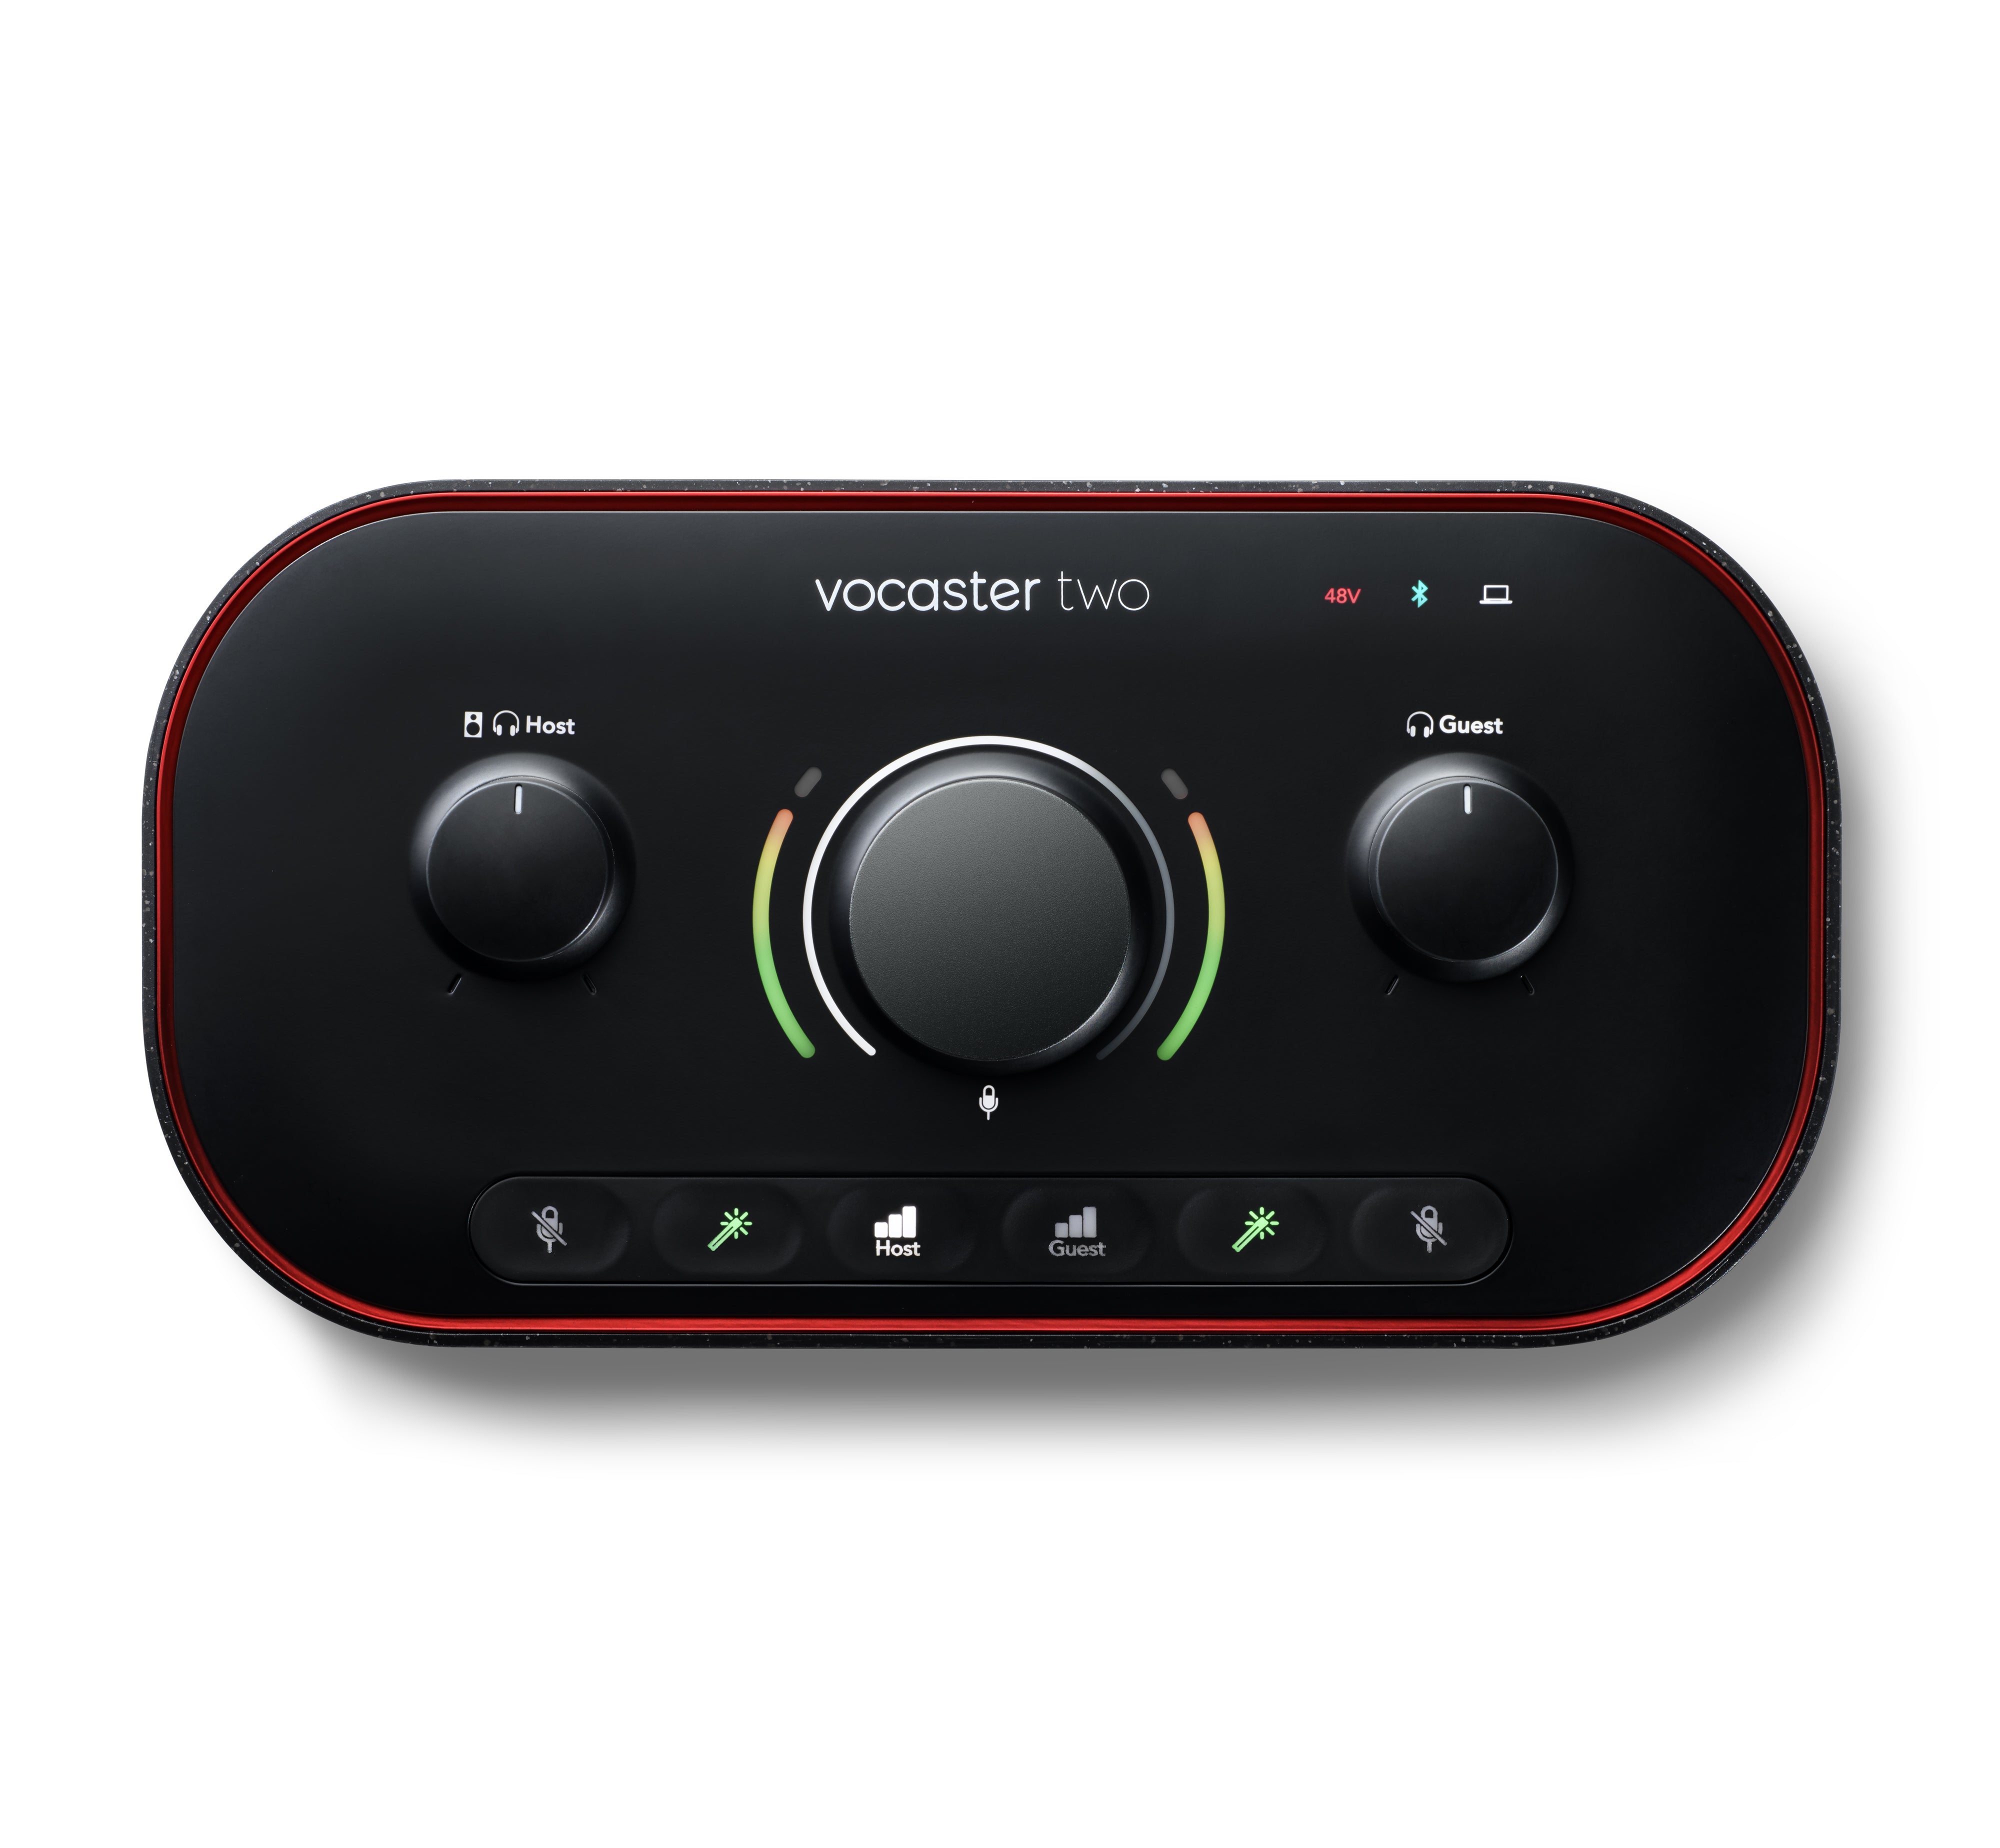 Focusrite Vocaster Two - The Podcast Interface for Content Creators